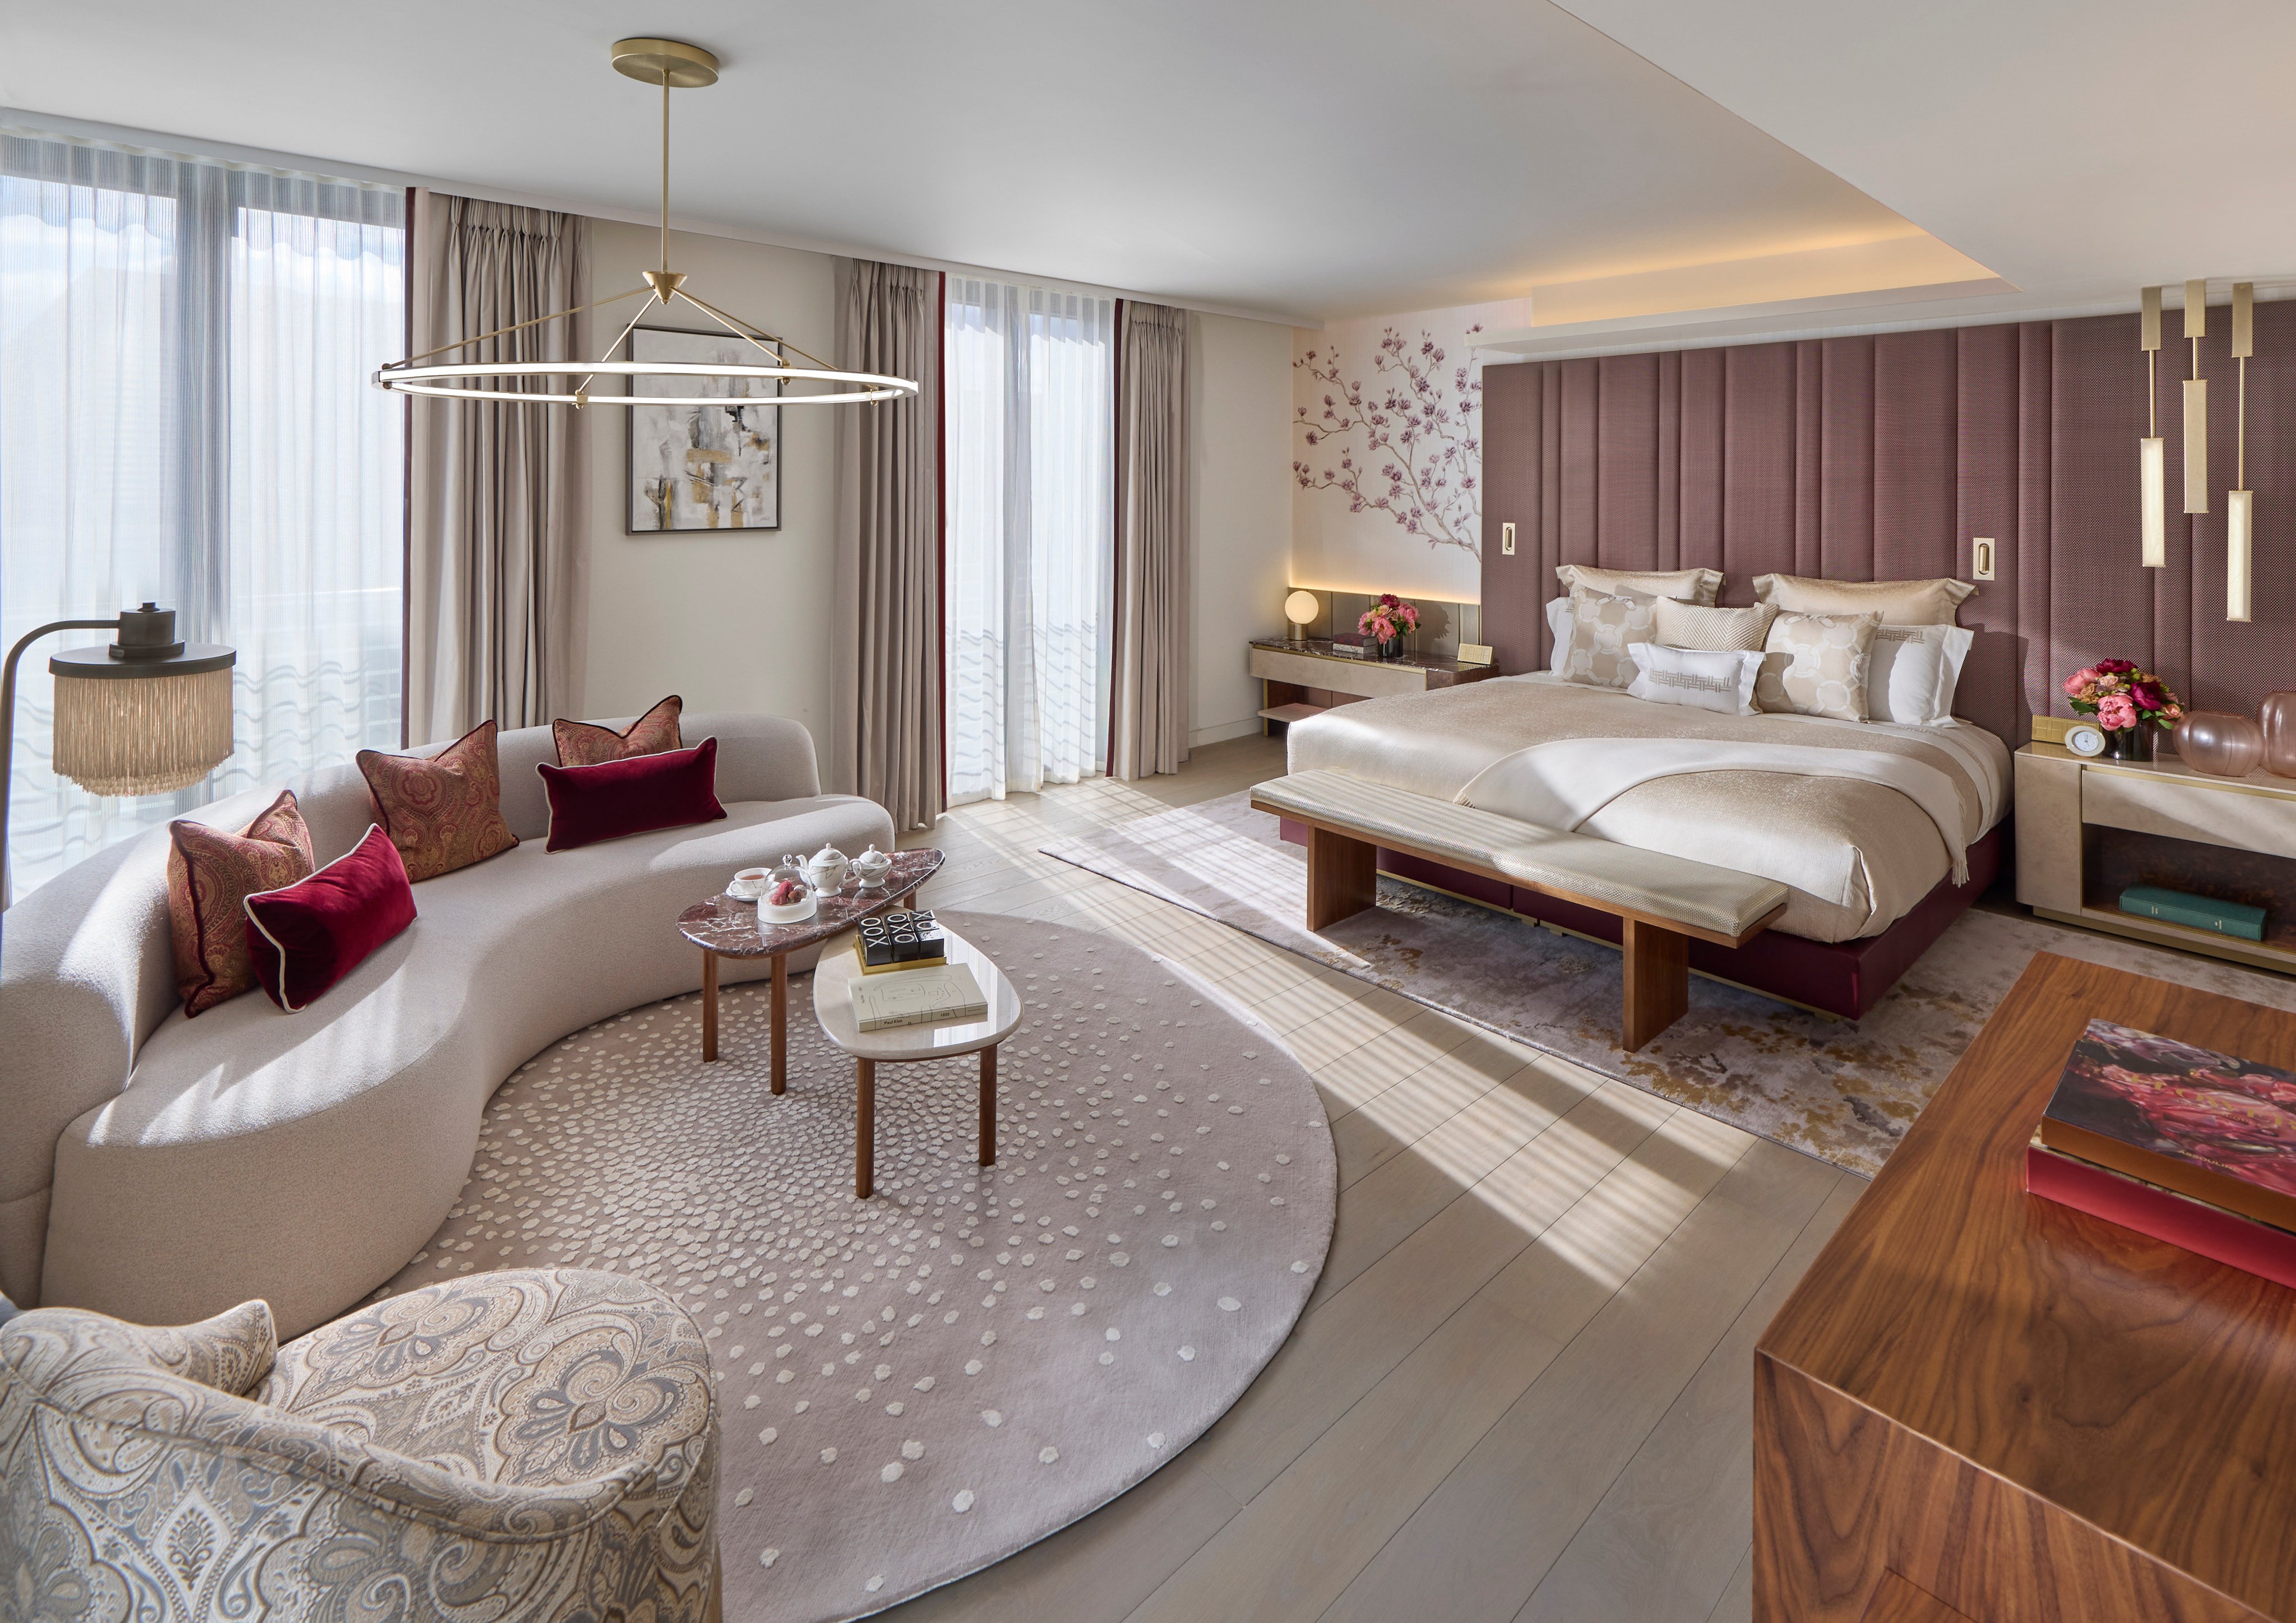 The newly built Mandarin Oriental Mayfair has 50 rooms and suites (including the Mayfair Suite, above), bars and restaurants offering modern Asian-influenced dishes and drinks, and an impressive spa with a 25-metre pool. Photo: Mandarin Oriental